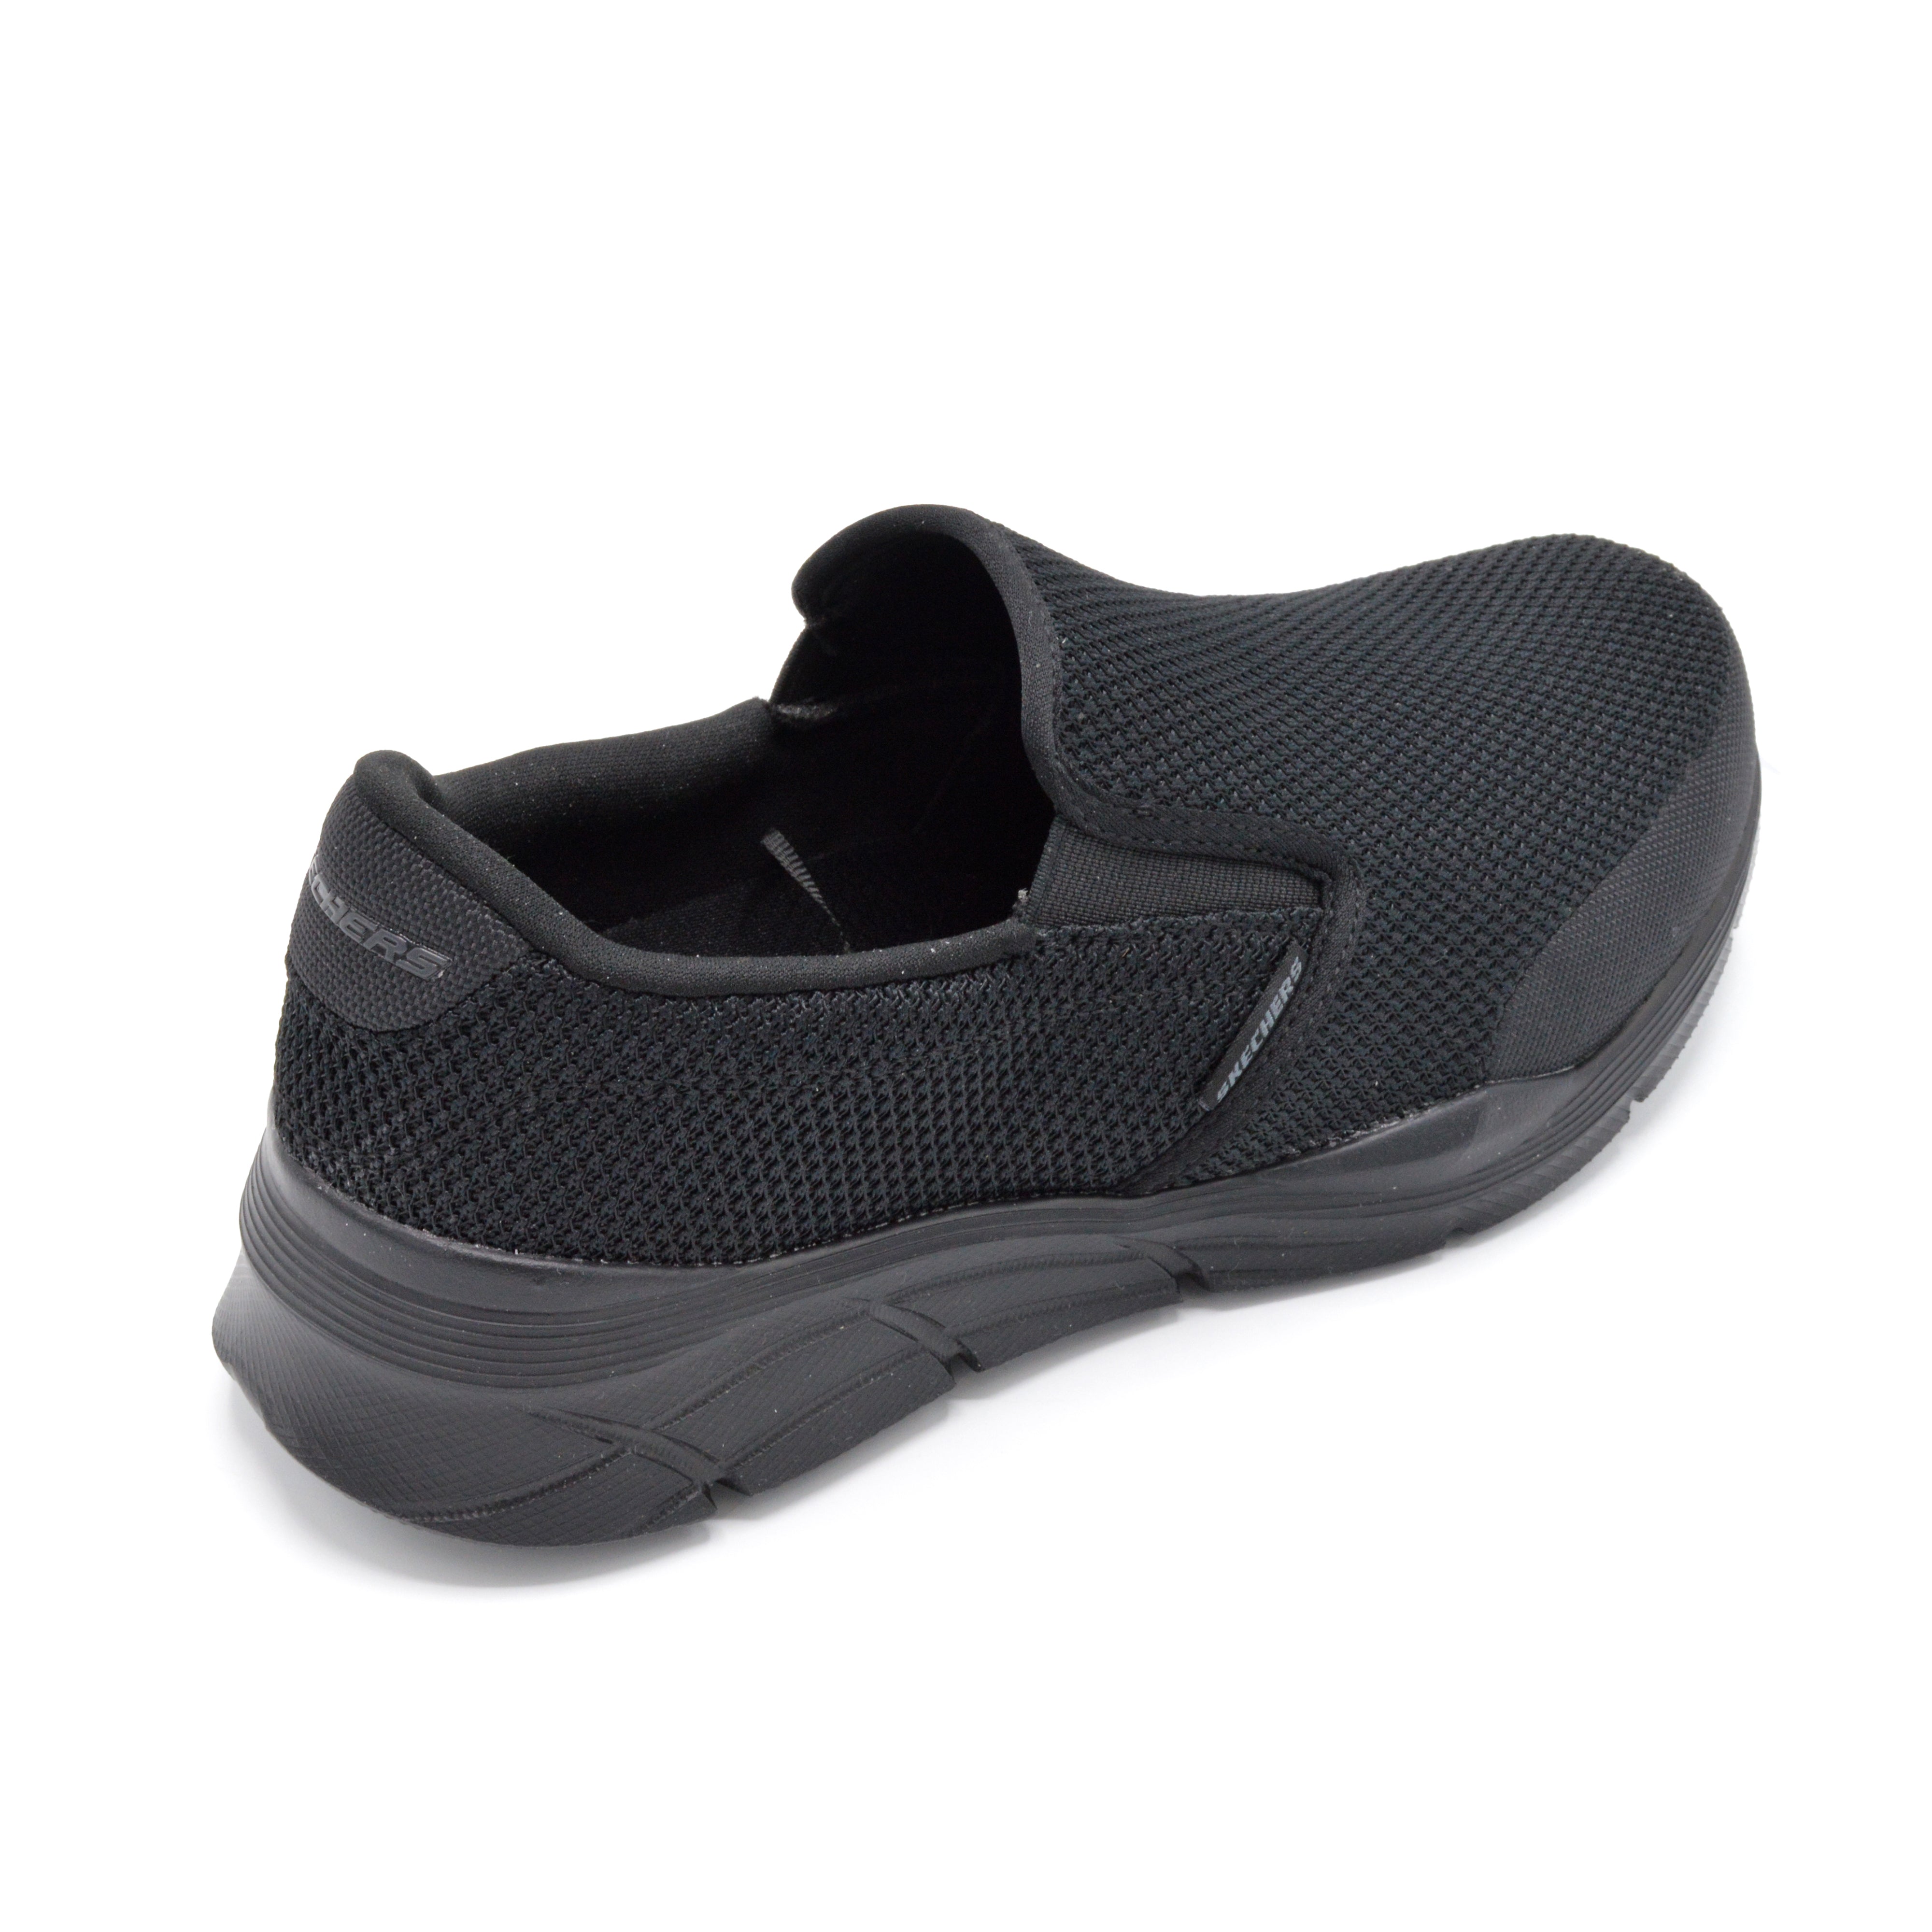 Skechers Extra Wide Fit Trainer For Bunions